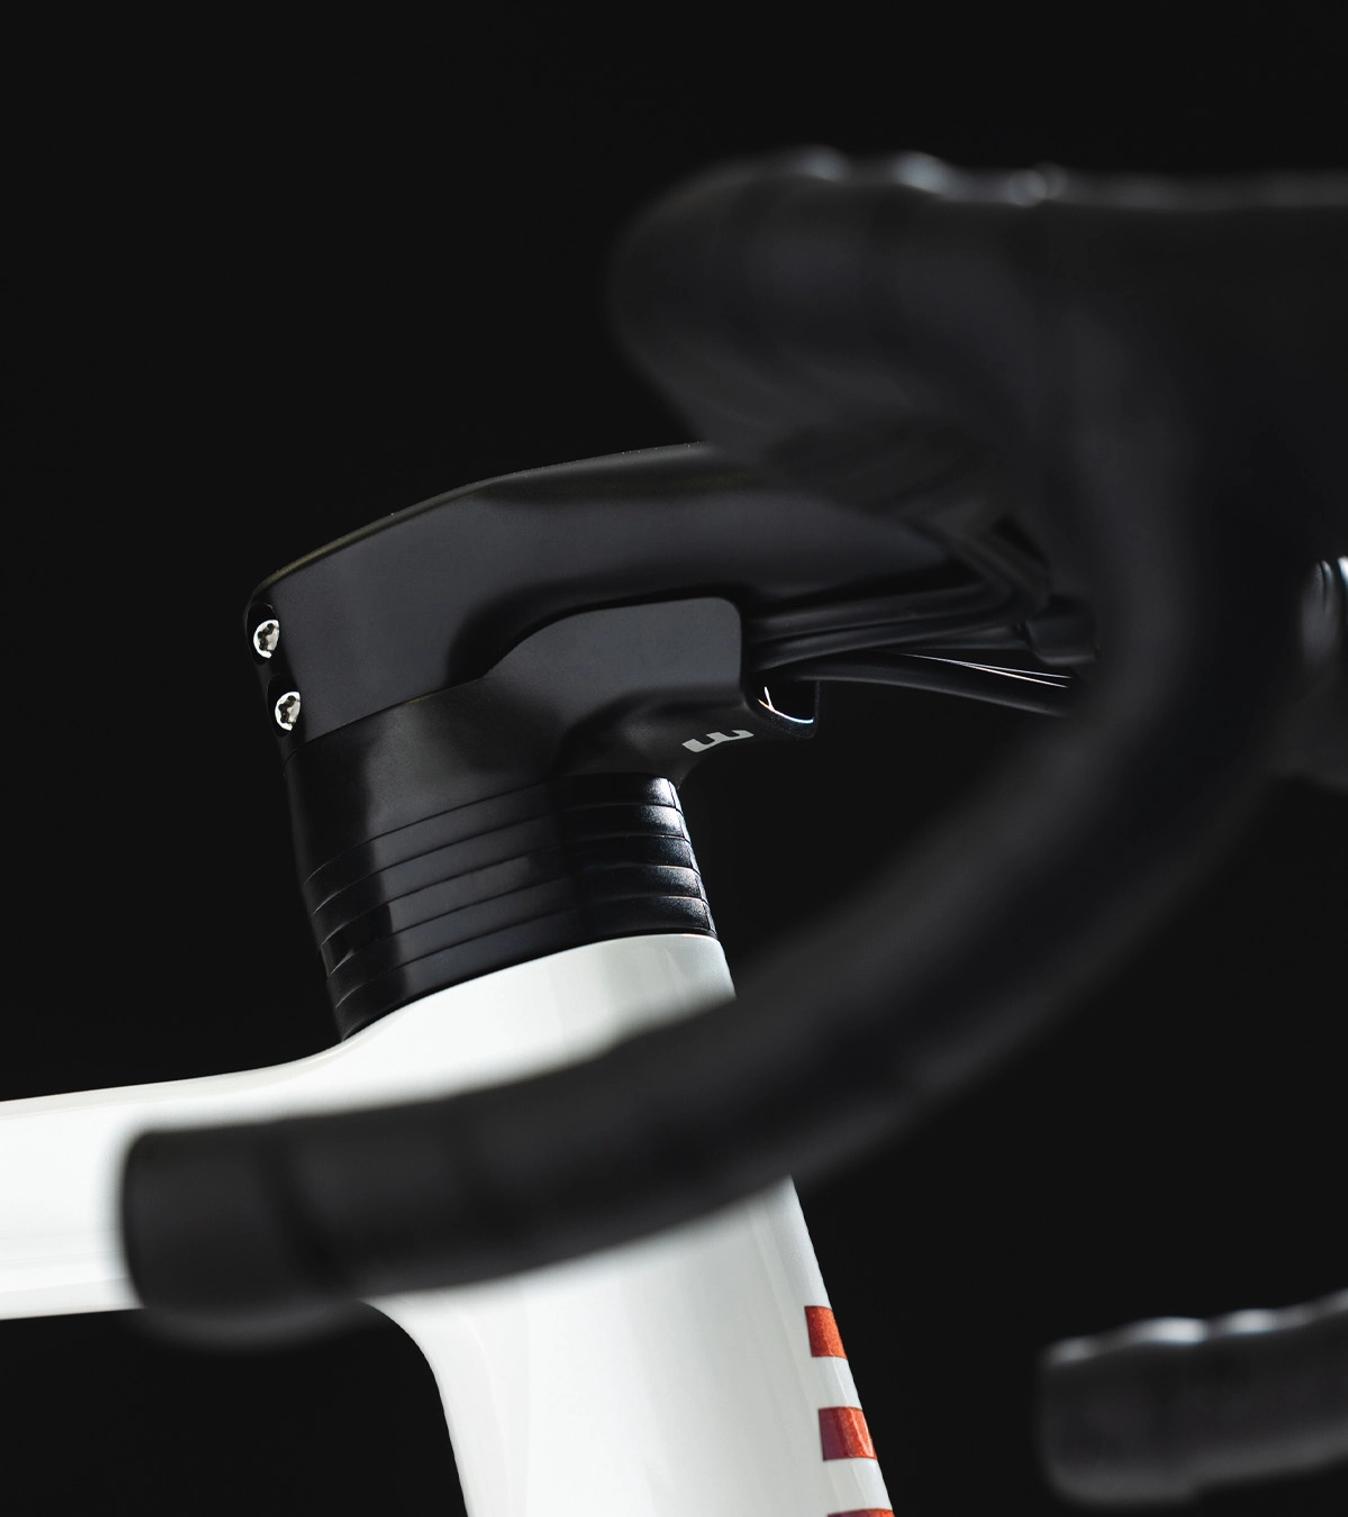 Basso's Microtech headset simplifies internal cable routing